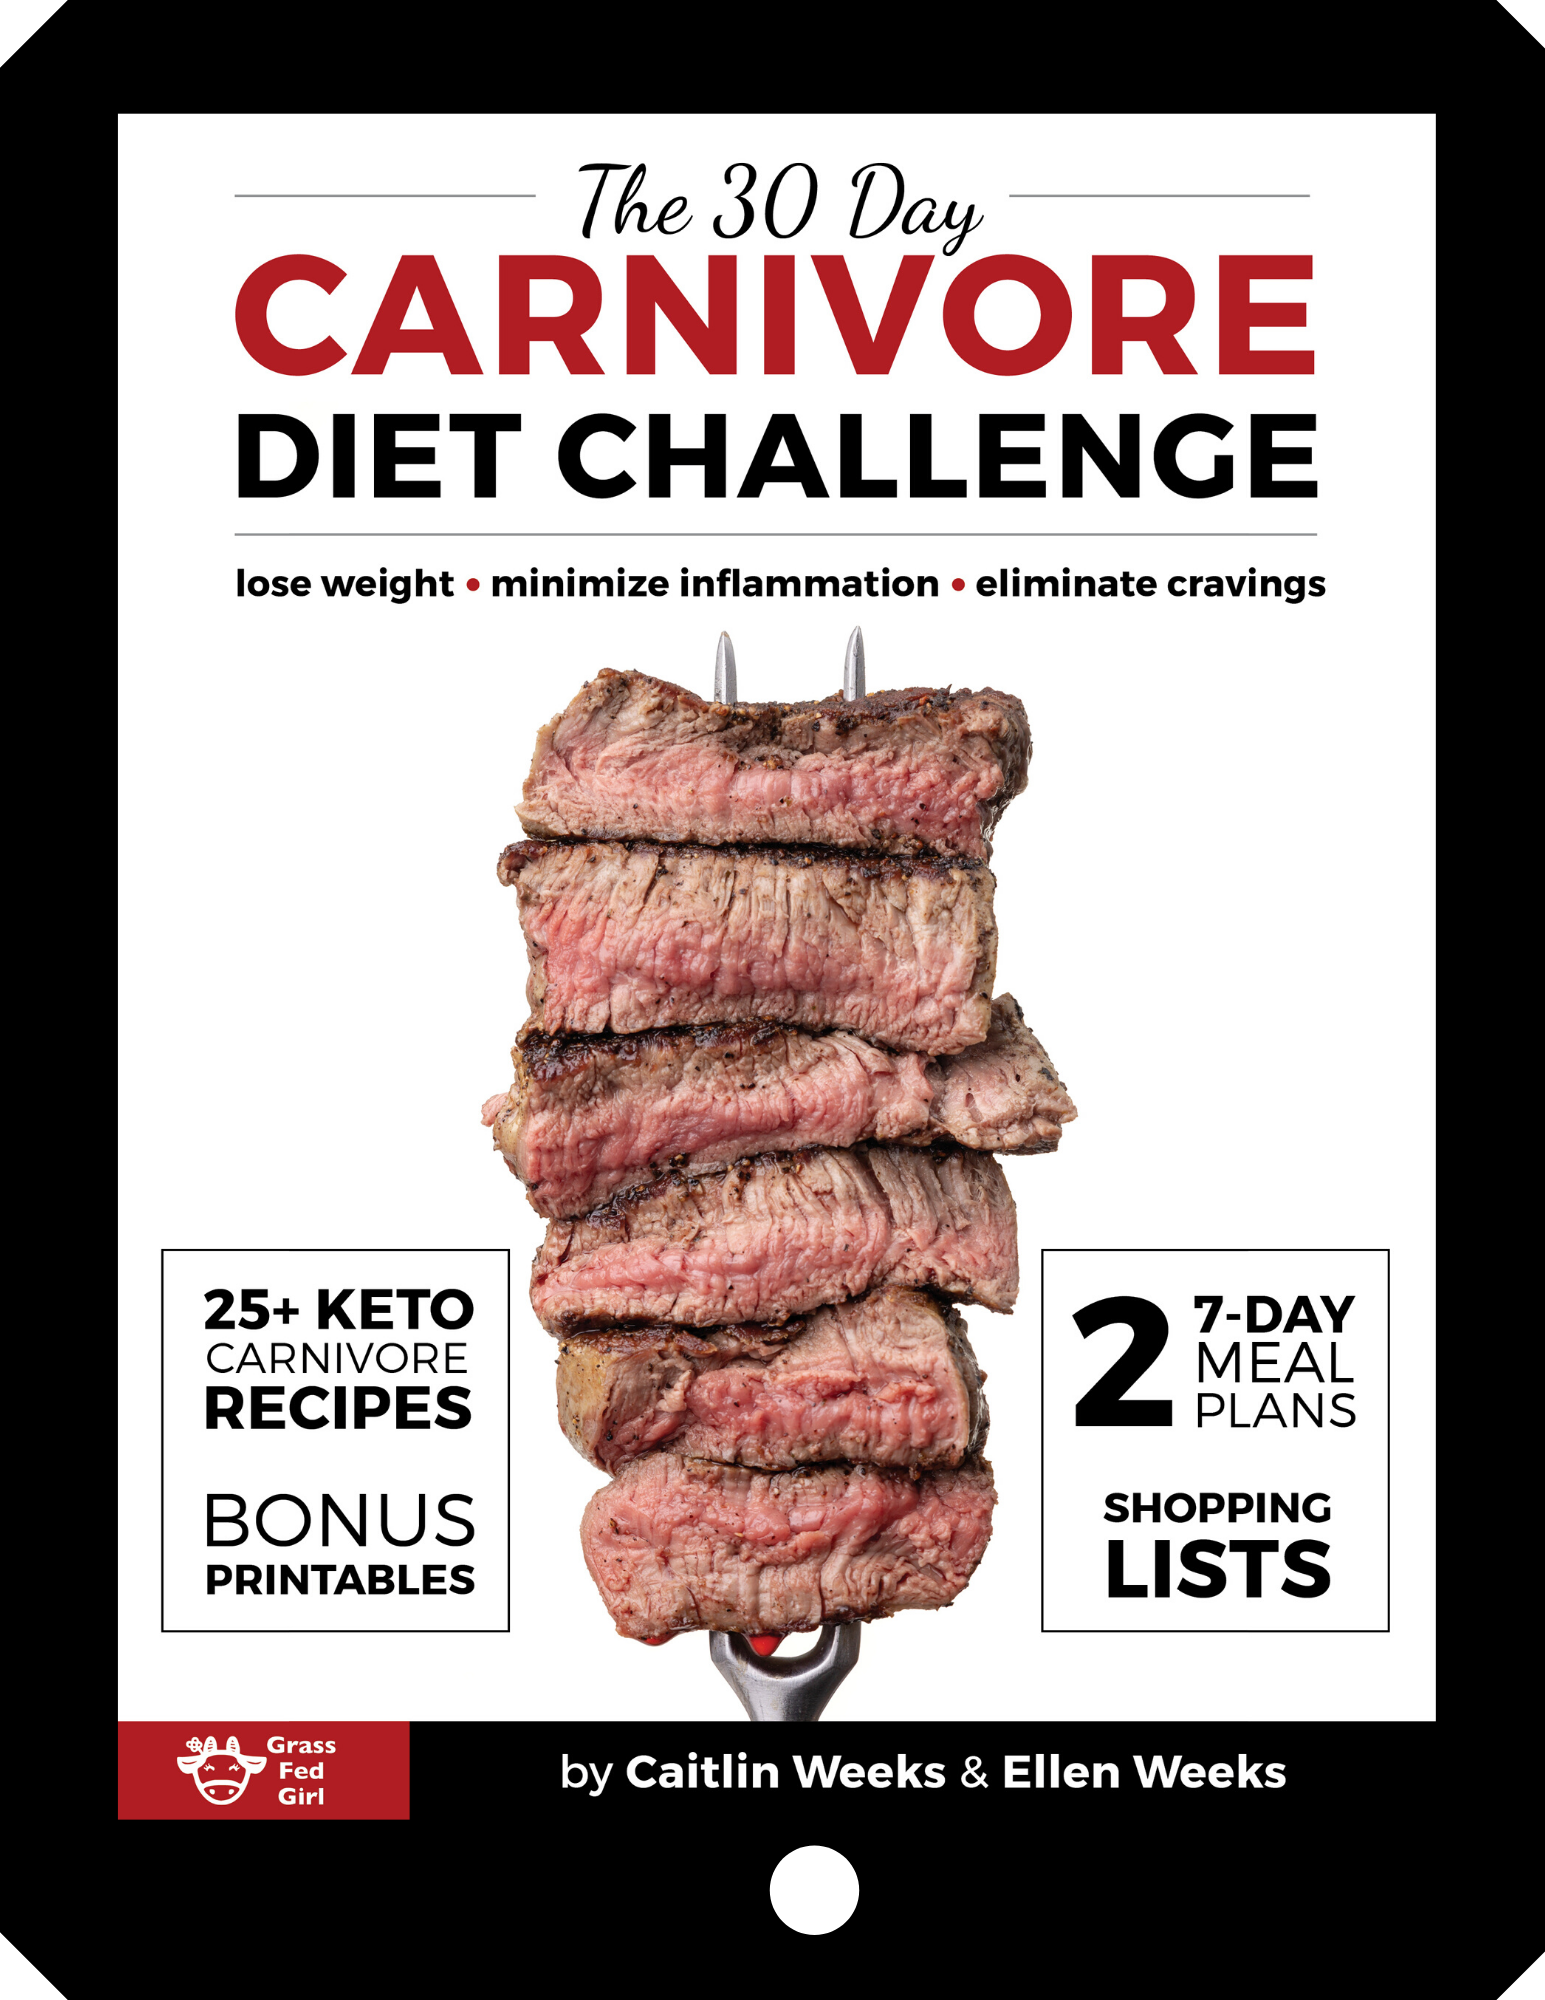 30 Day Carnivore Diet Challenge with Common Carnivore Questions